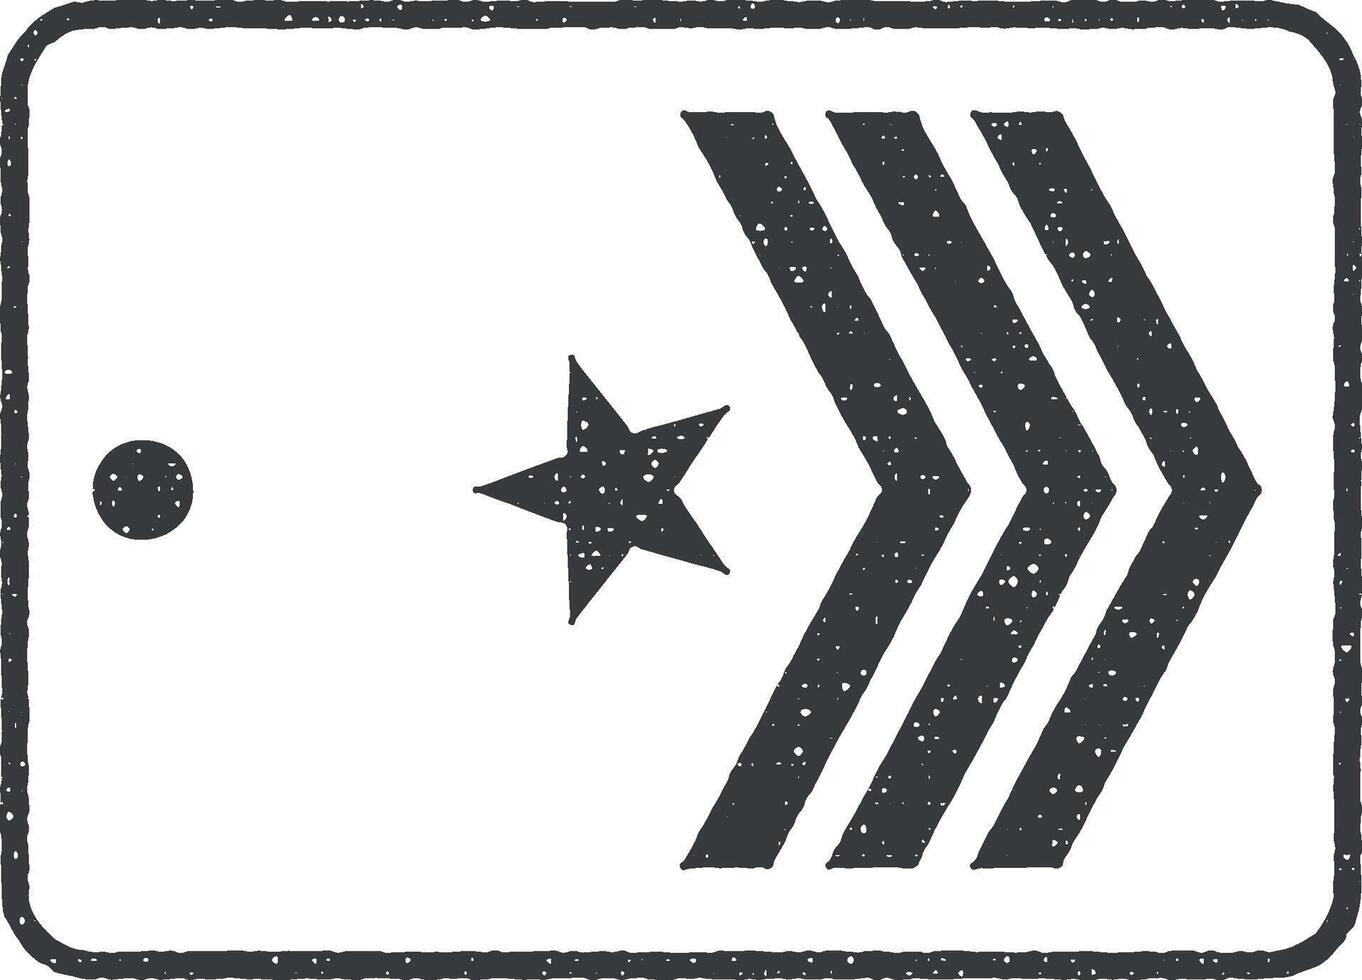 military epaulettes vector icon illustration with stamp effect